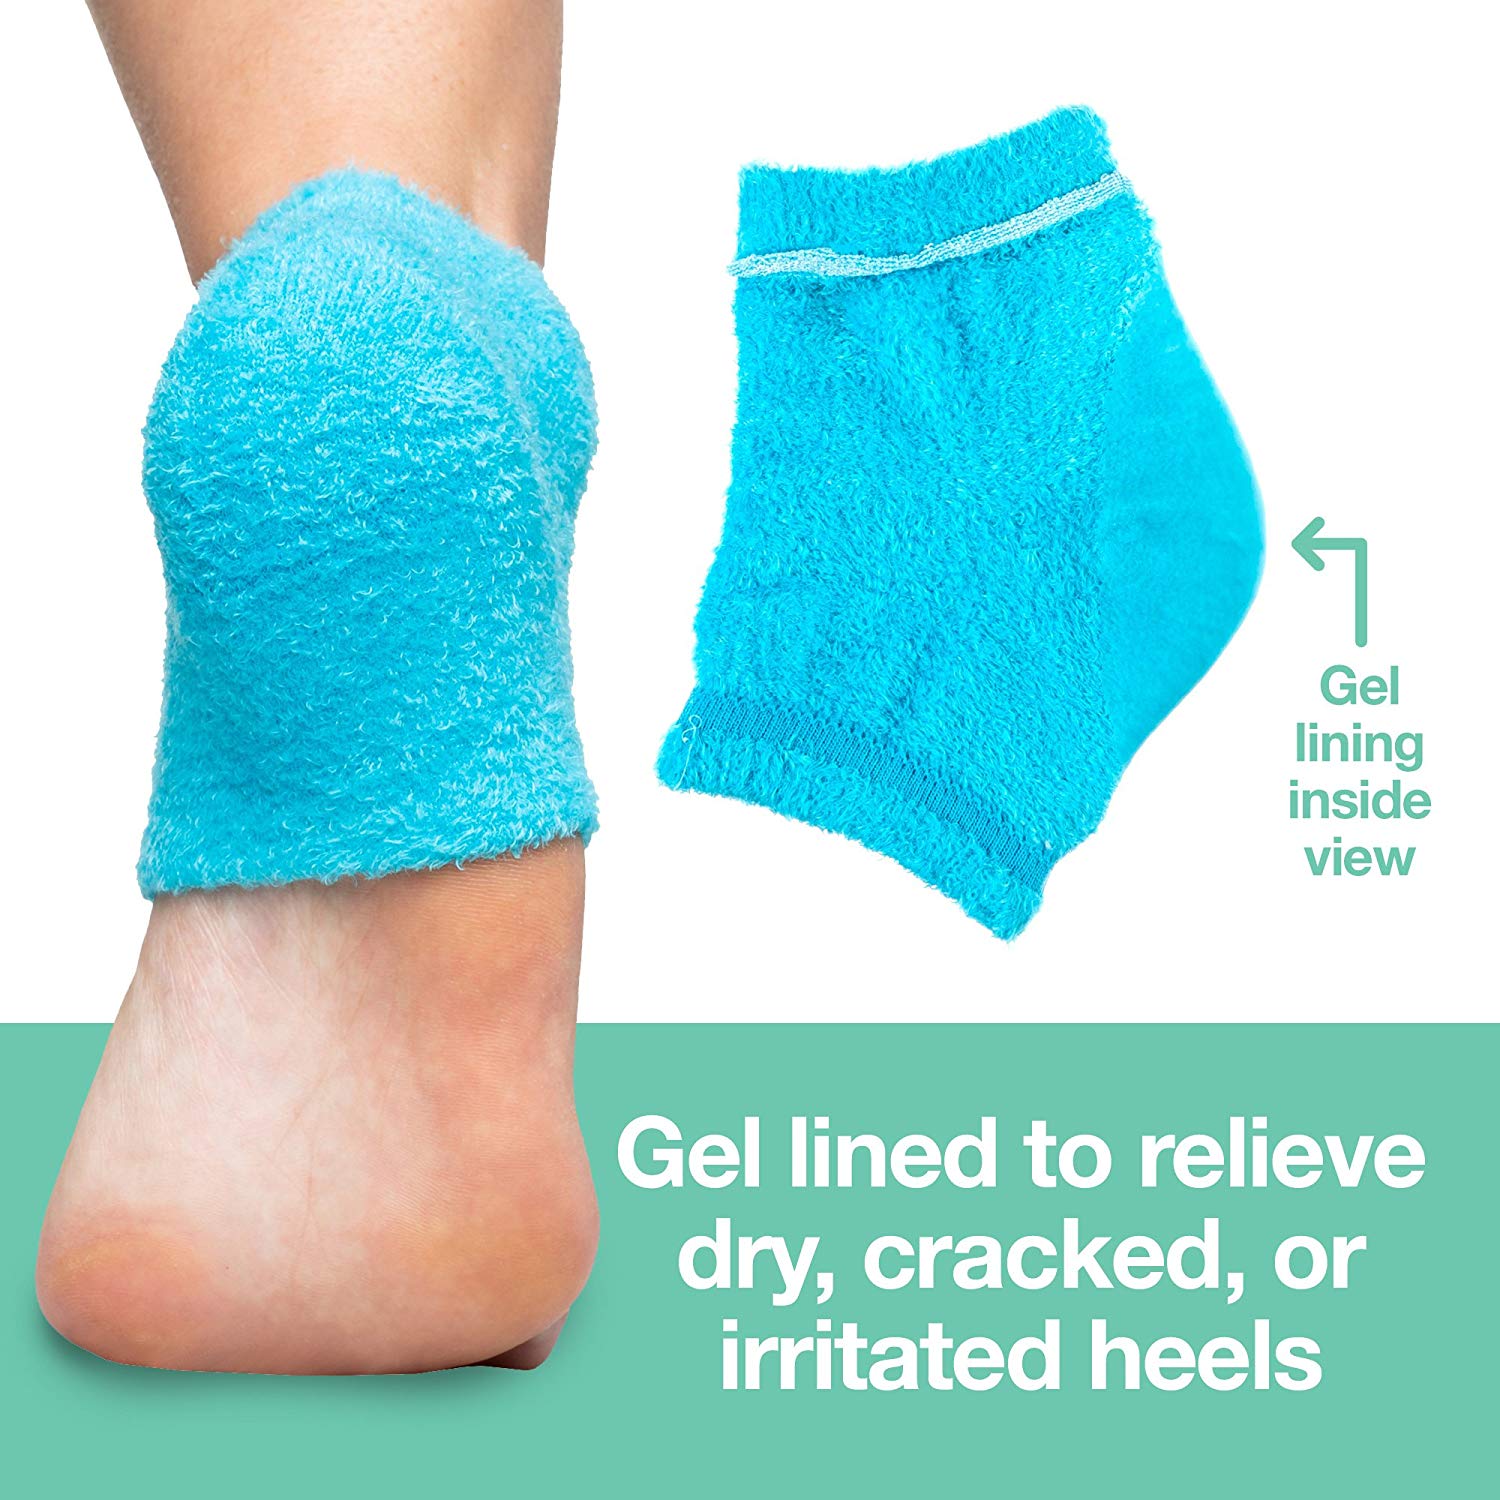 Moisturizing Gel Socks - Foot Moisturizing Socks for Dry Feet and Cracked  Heel Spa Treatment, Relief Therapy Cracked Feet Repair with Moisturizer and